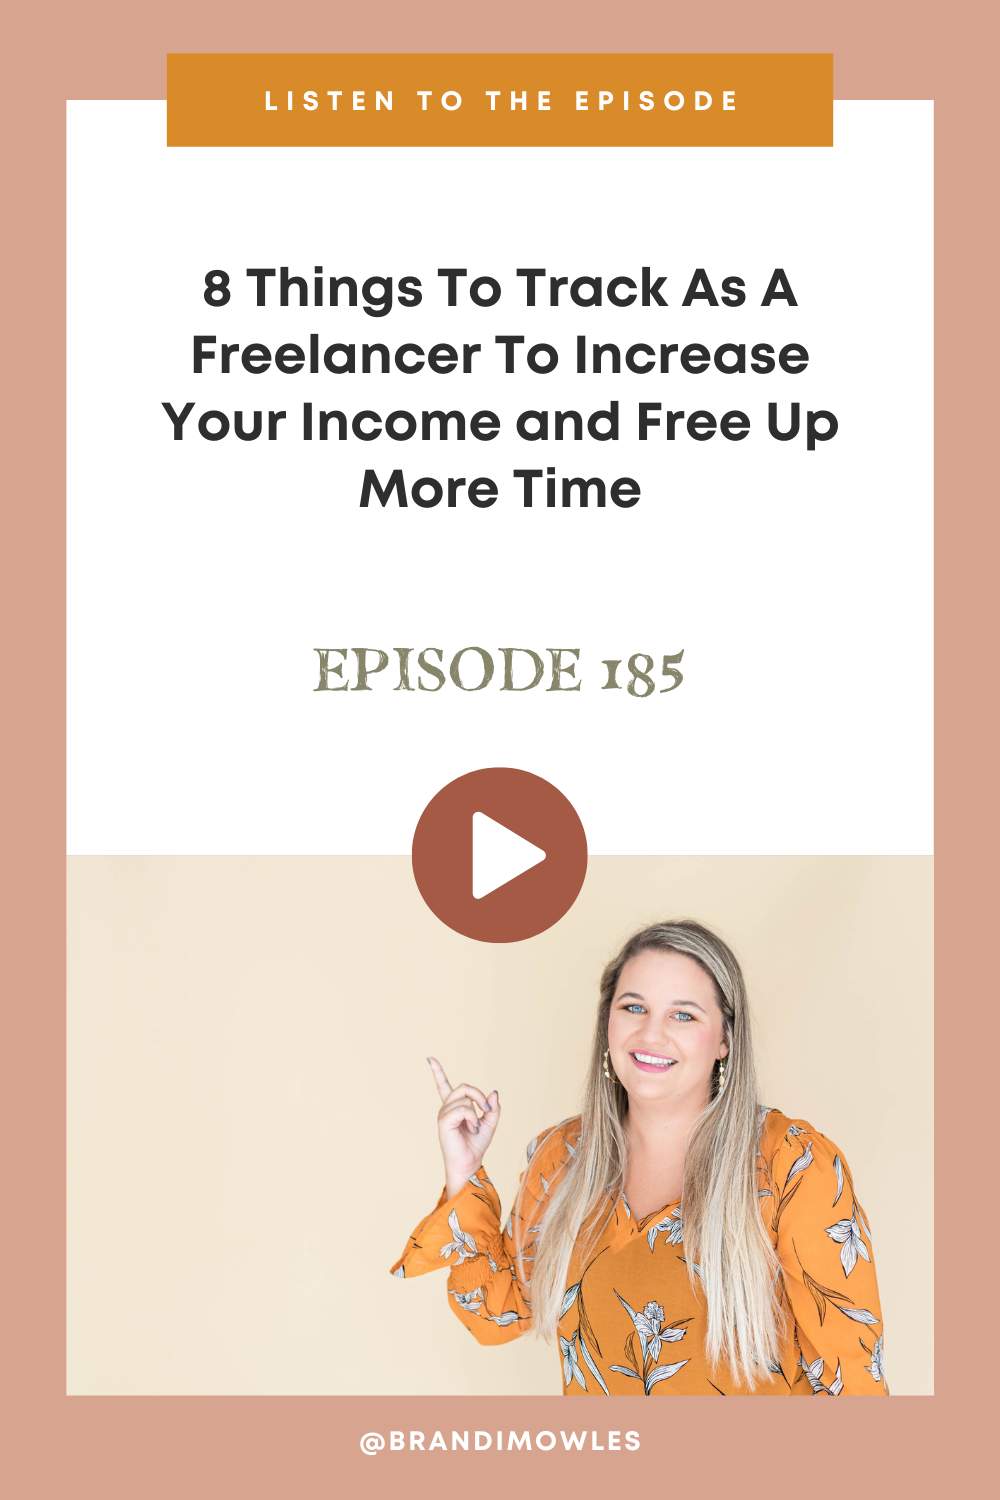 Brandi Mowles podcast episode feature about tracking in your business